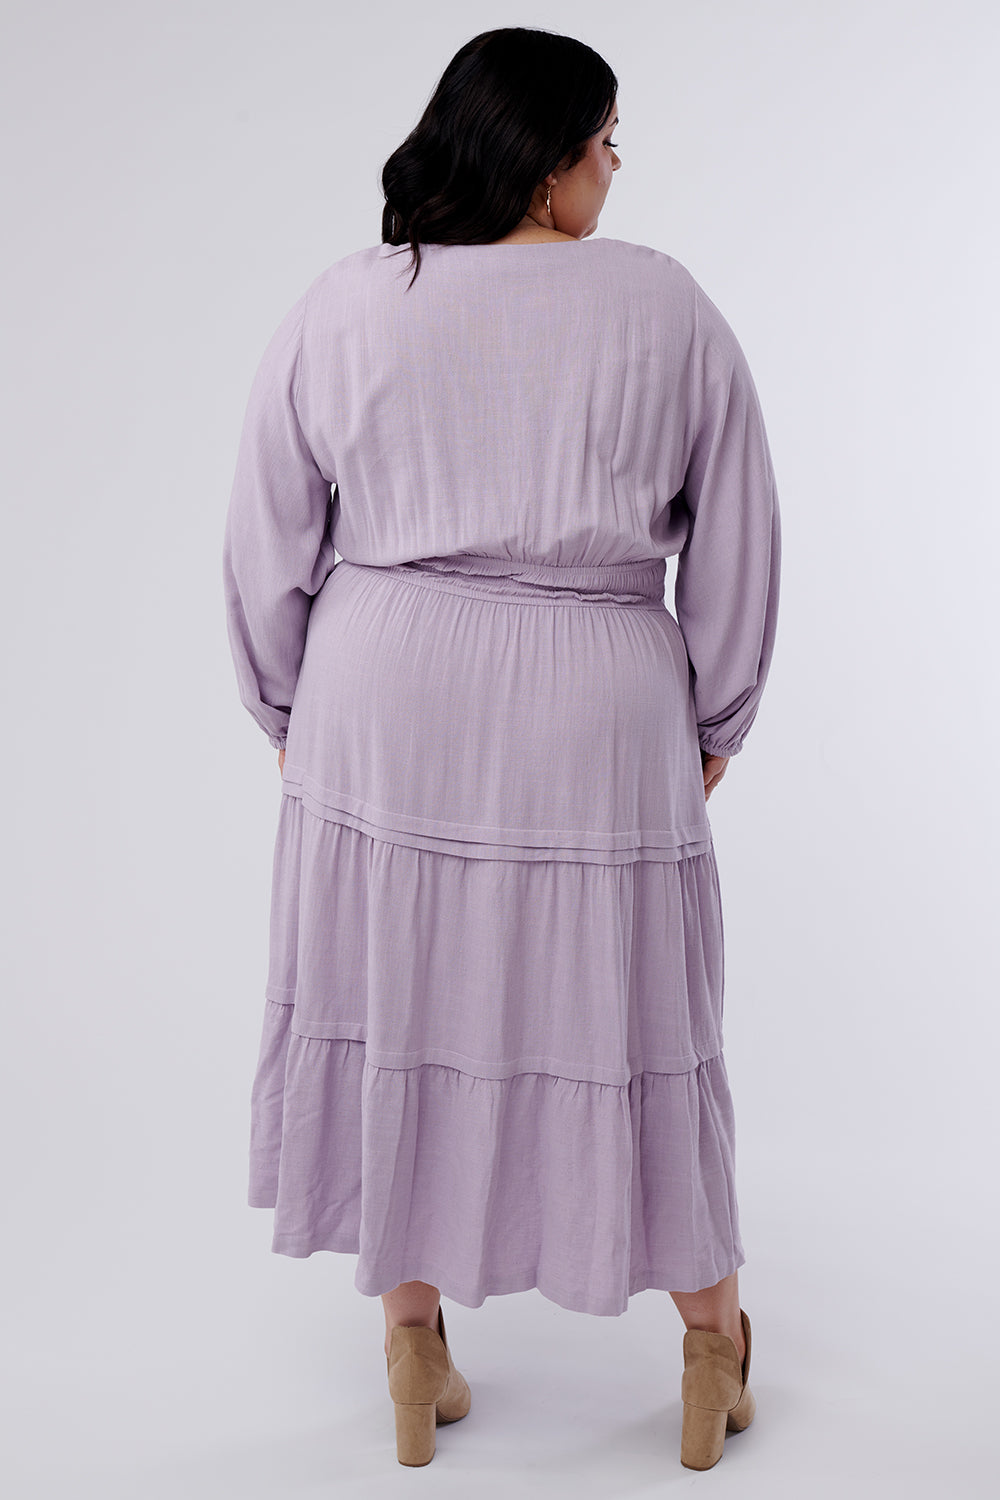 Eloise Tiered Dress-Lilac